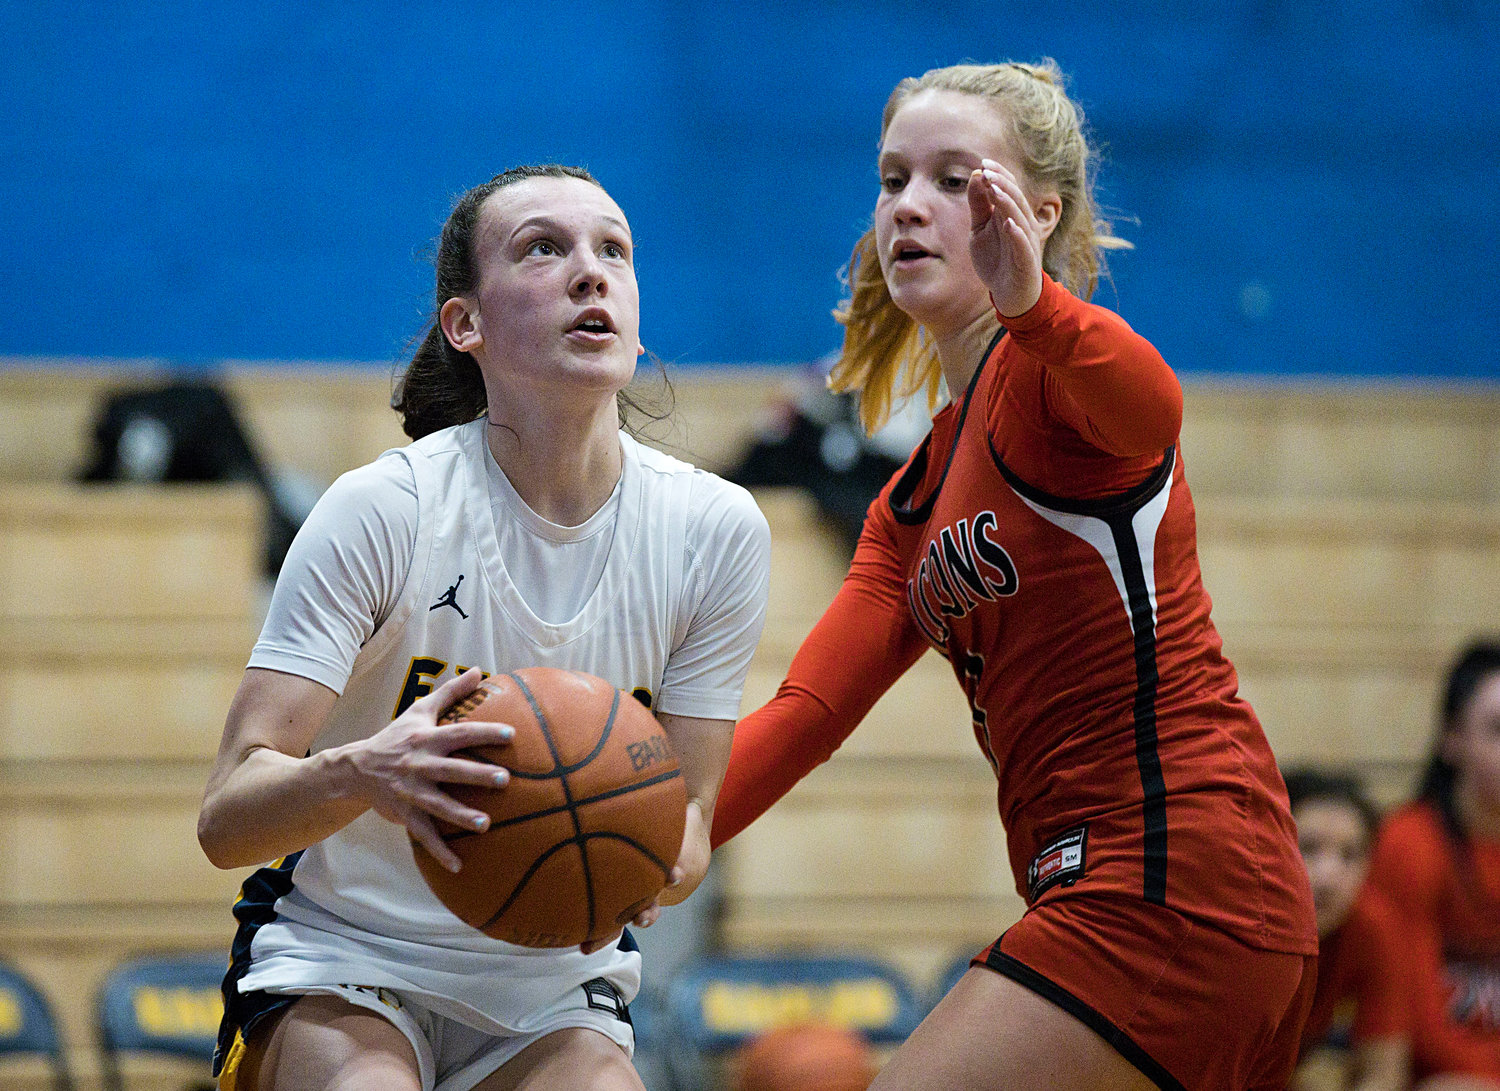 Maddie Gill considers a shot while guarded closely by a Cranston West opponent.